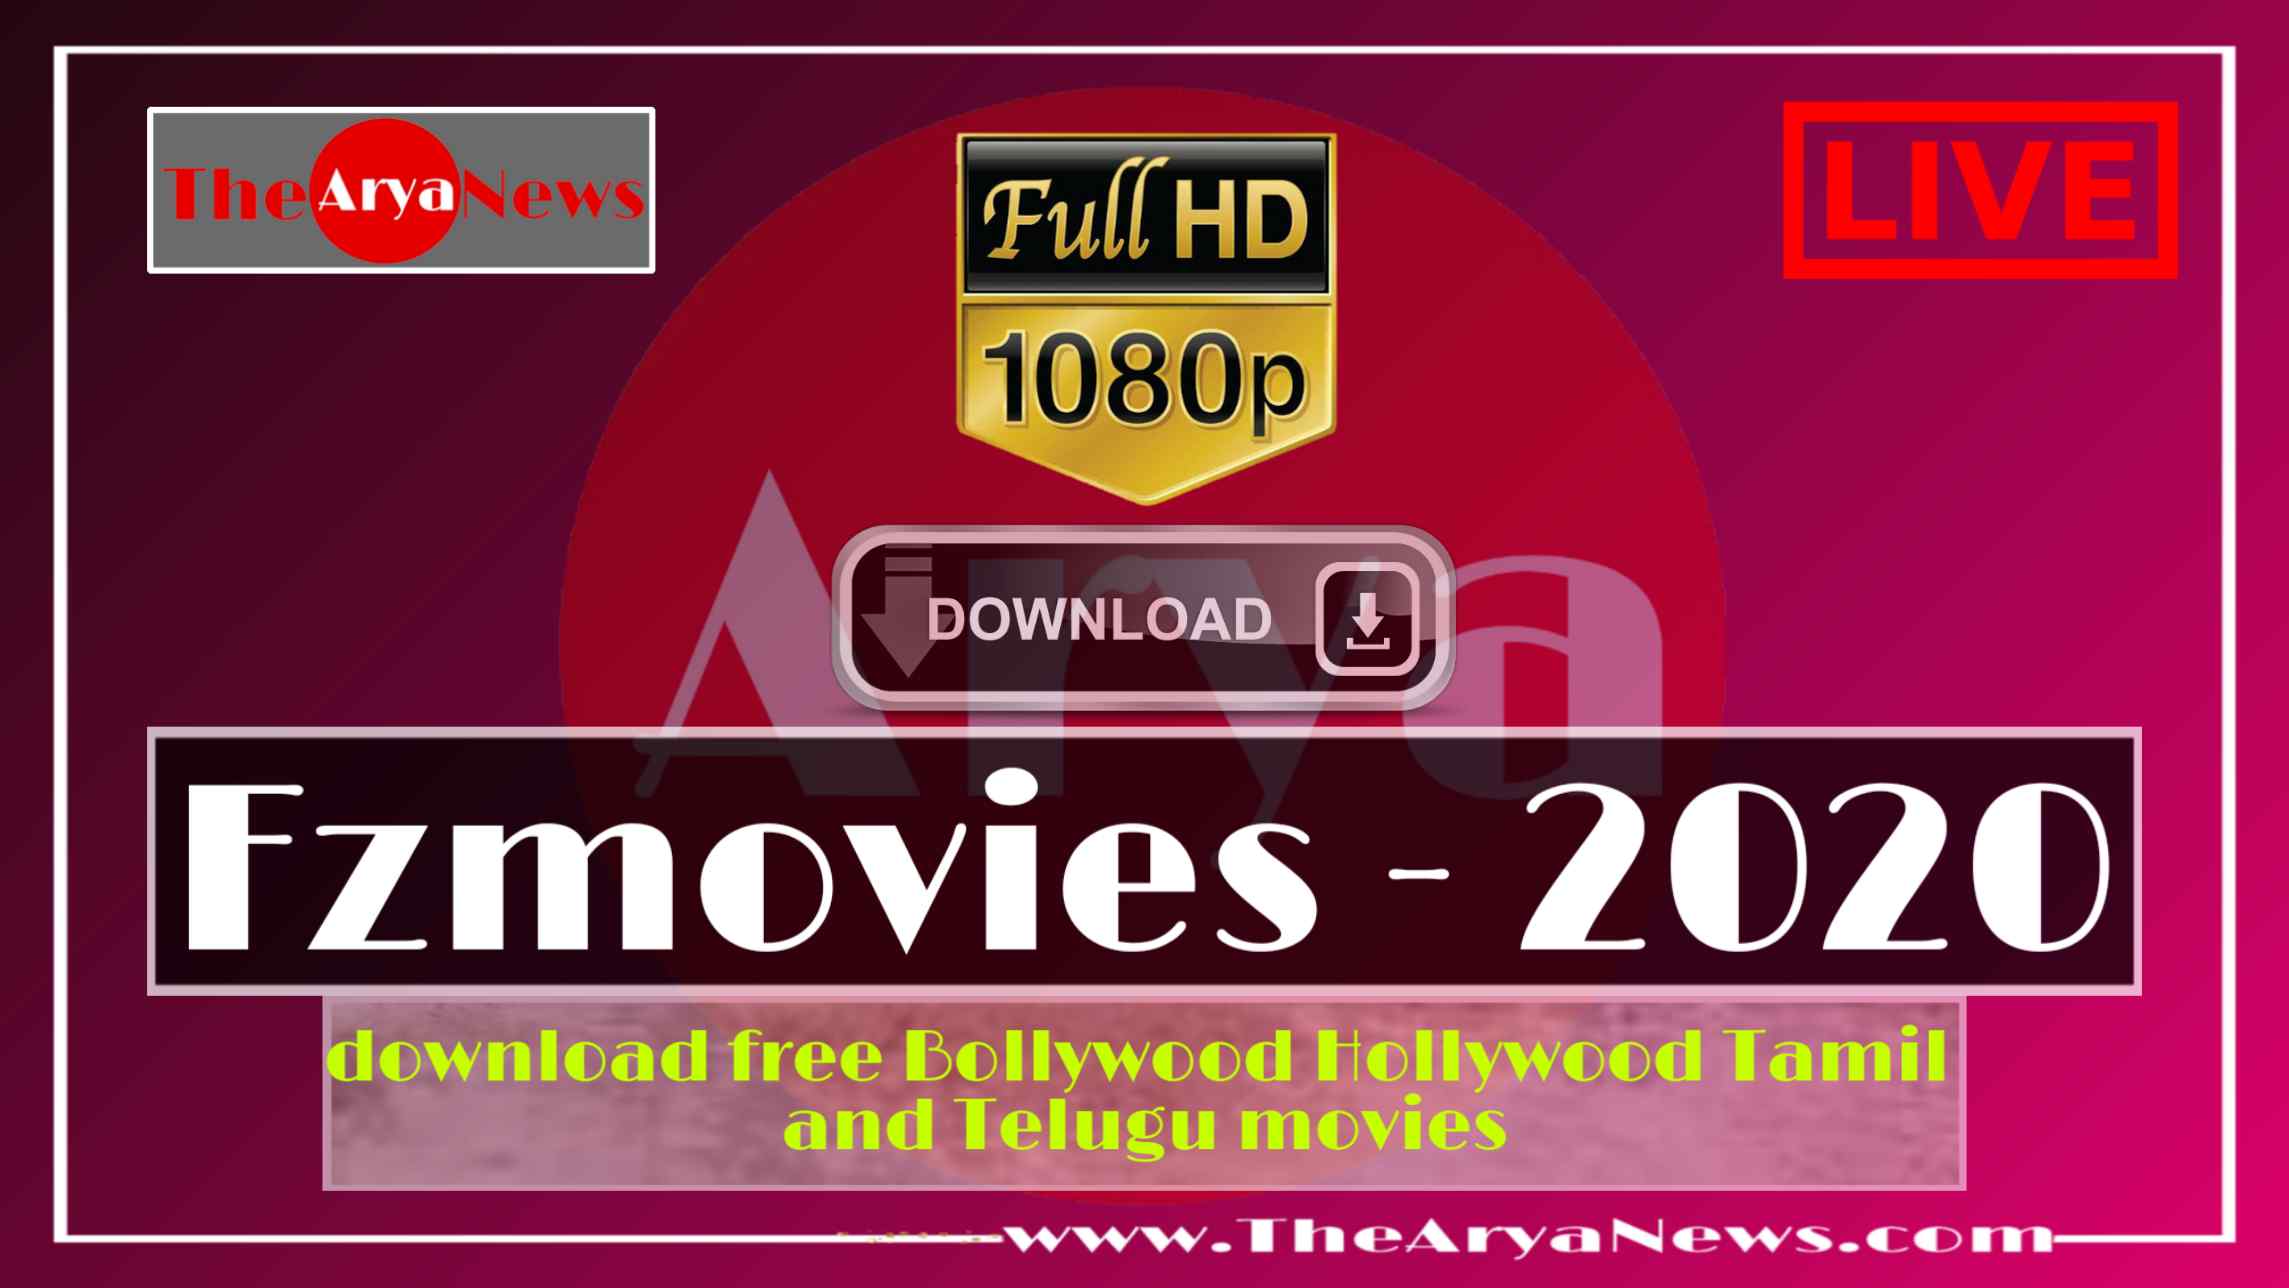 FMovies 2020 » Download Free Bollywood, Hollywood Dubbed Movies